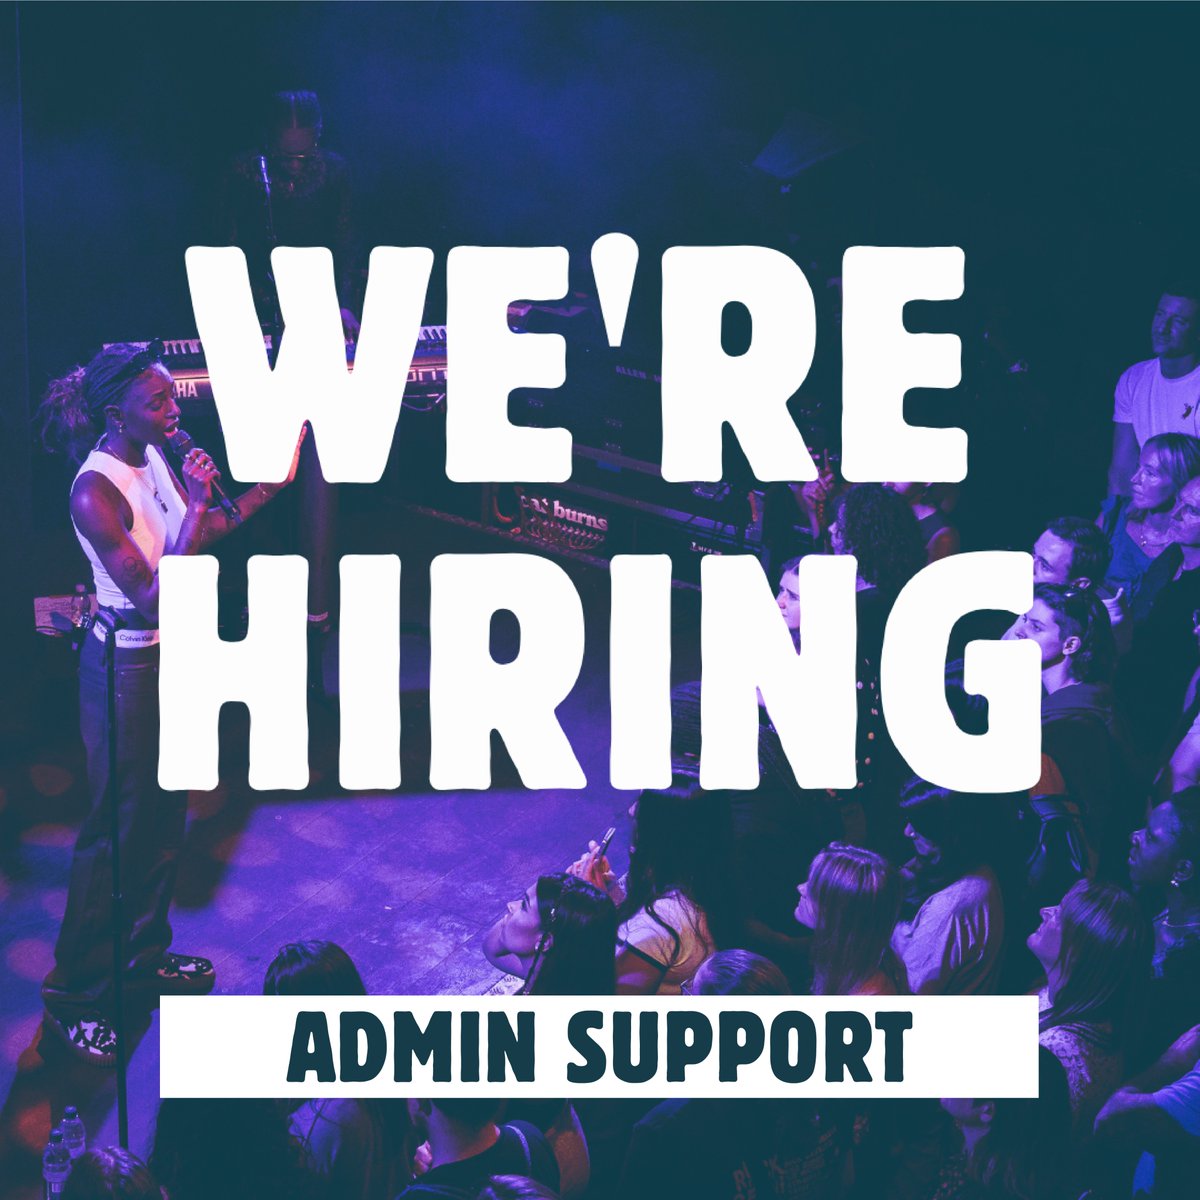 We are looking to appoint an England Coordinator and an Admin Support who are willing to get stuck in and join our passionate and dedicated team. Importantly, we are looking for people who can demonstrate they are committed to the Grassroots Music Venue sector. 1/4.